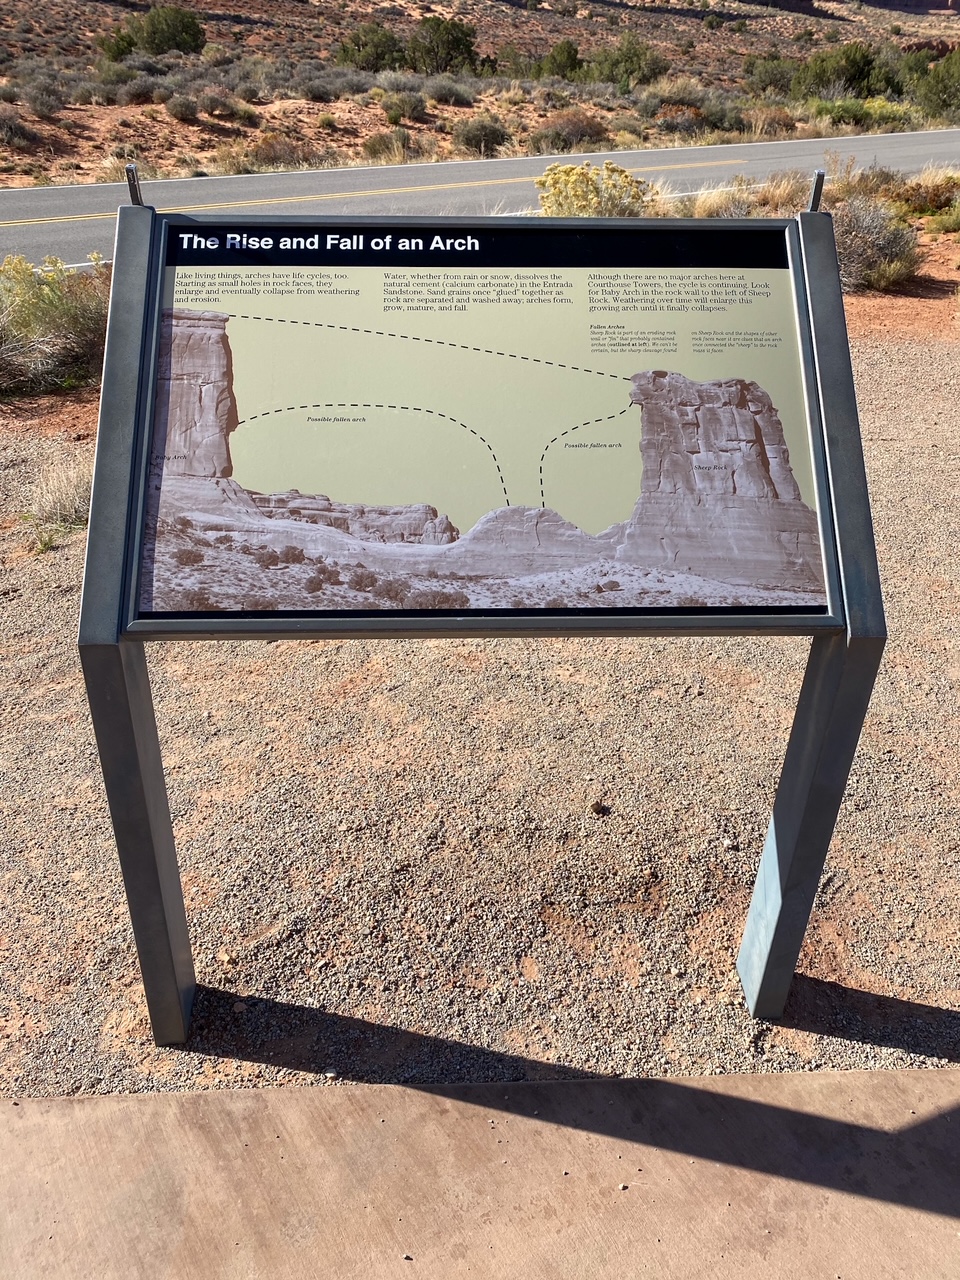 an interesting sign depicting "The Rise and Fall of an Arch"